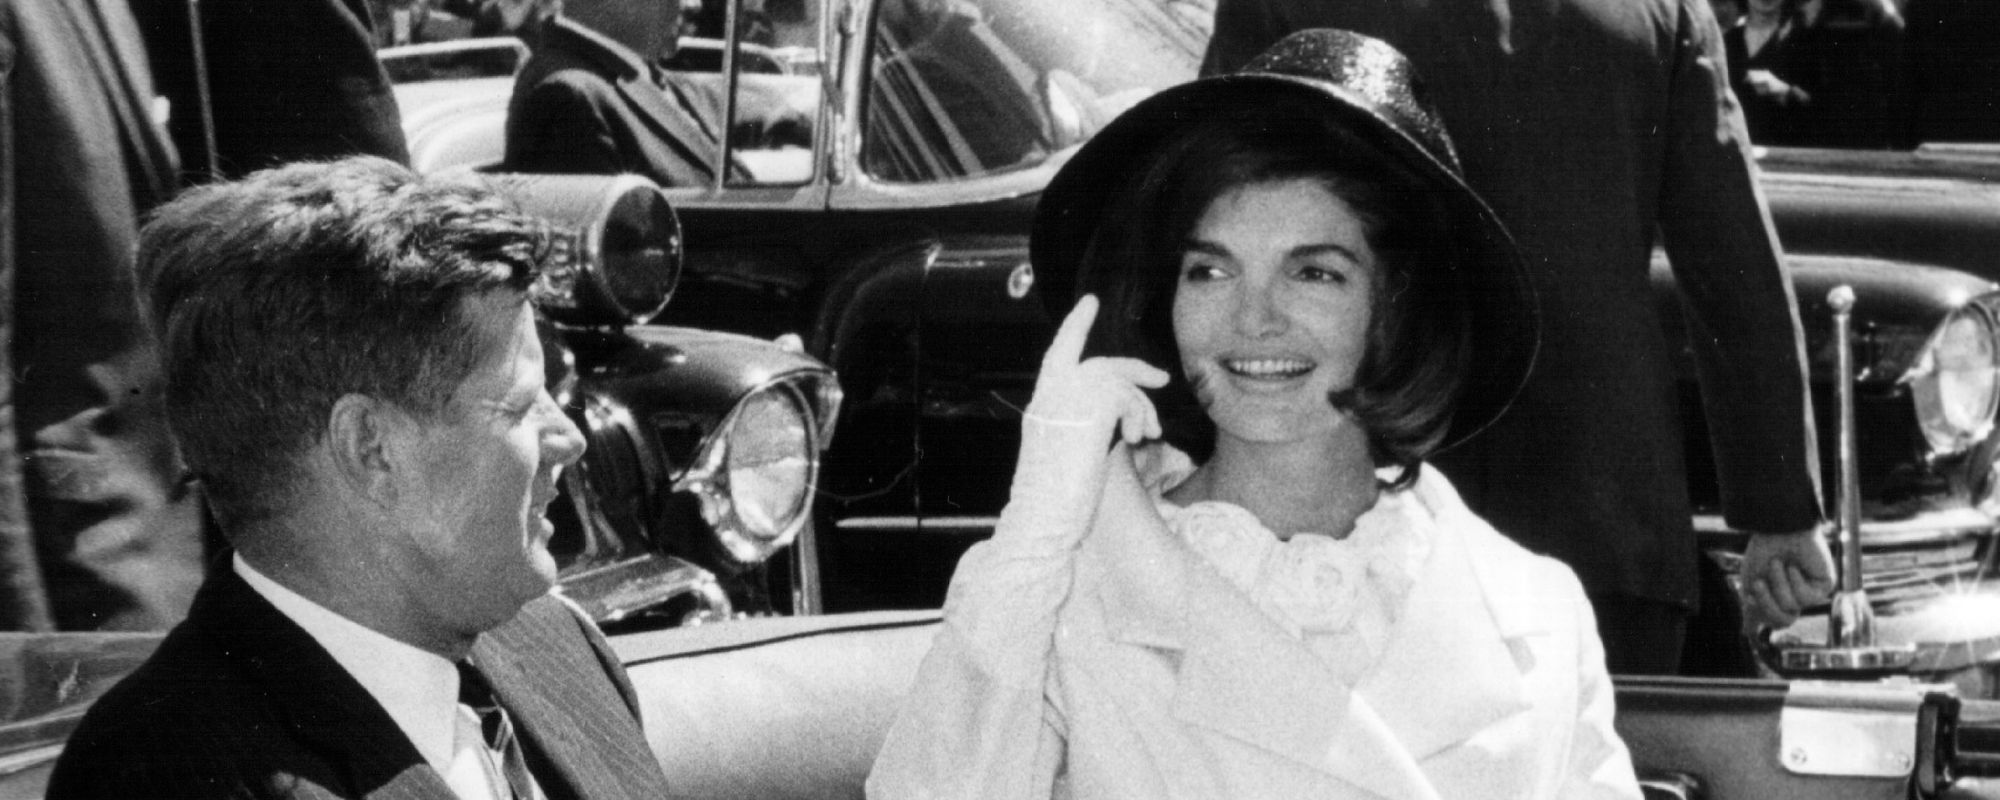 Jackie Kennedy: The story behind her iconic pink Chanel suit